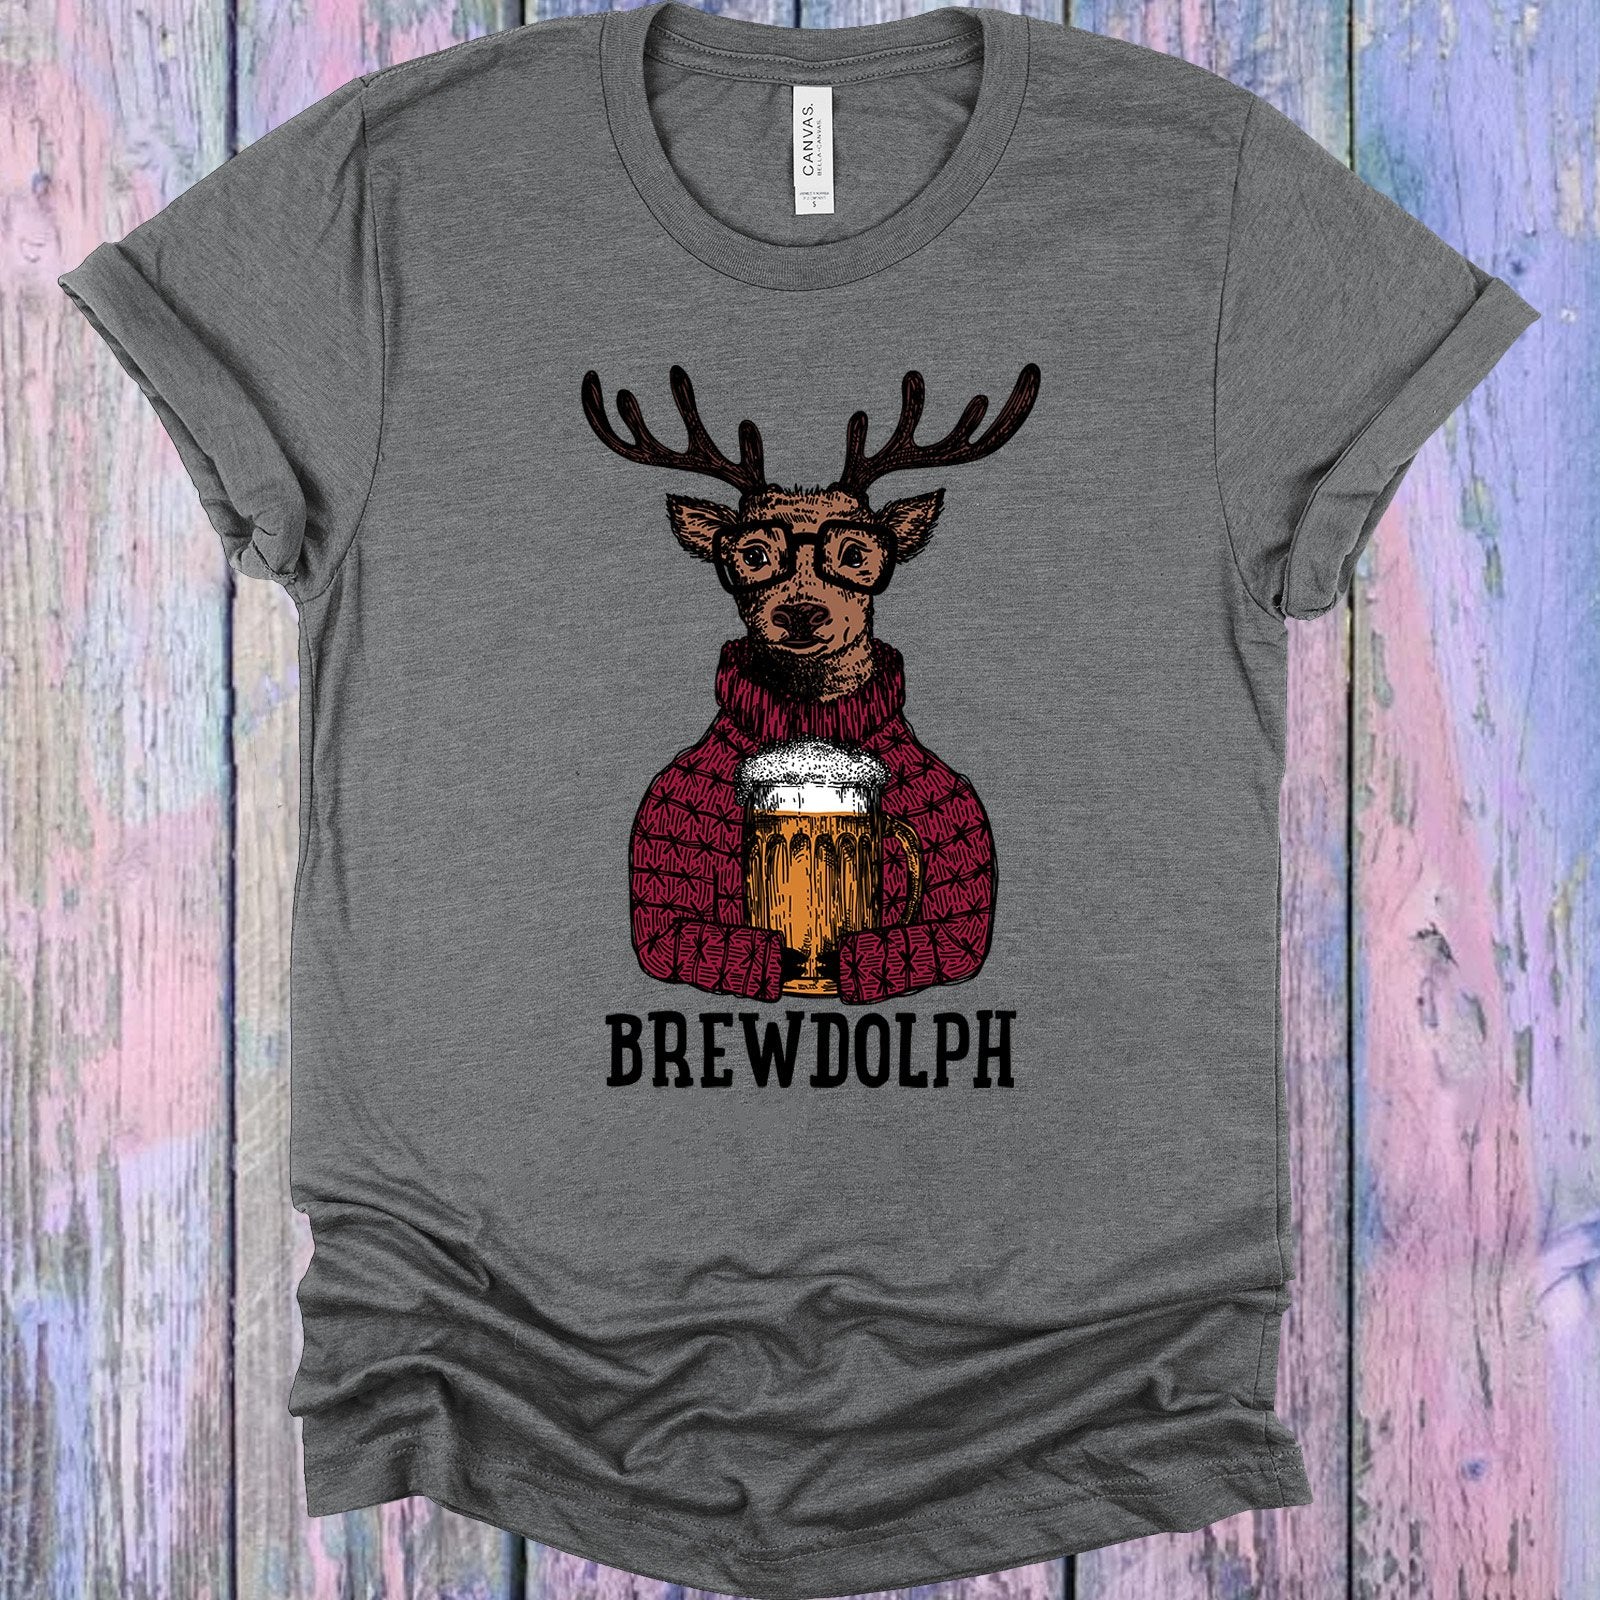 Brewdolph Graphic Tee Graphic Tee